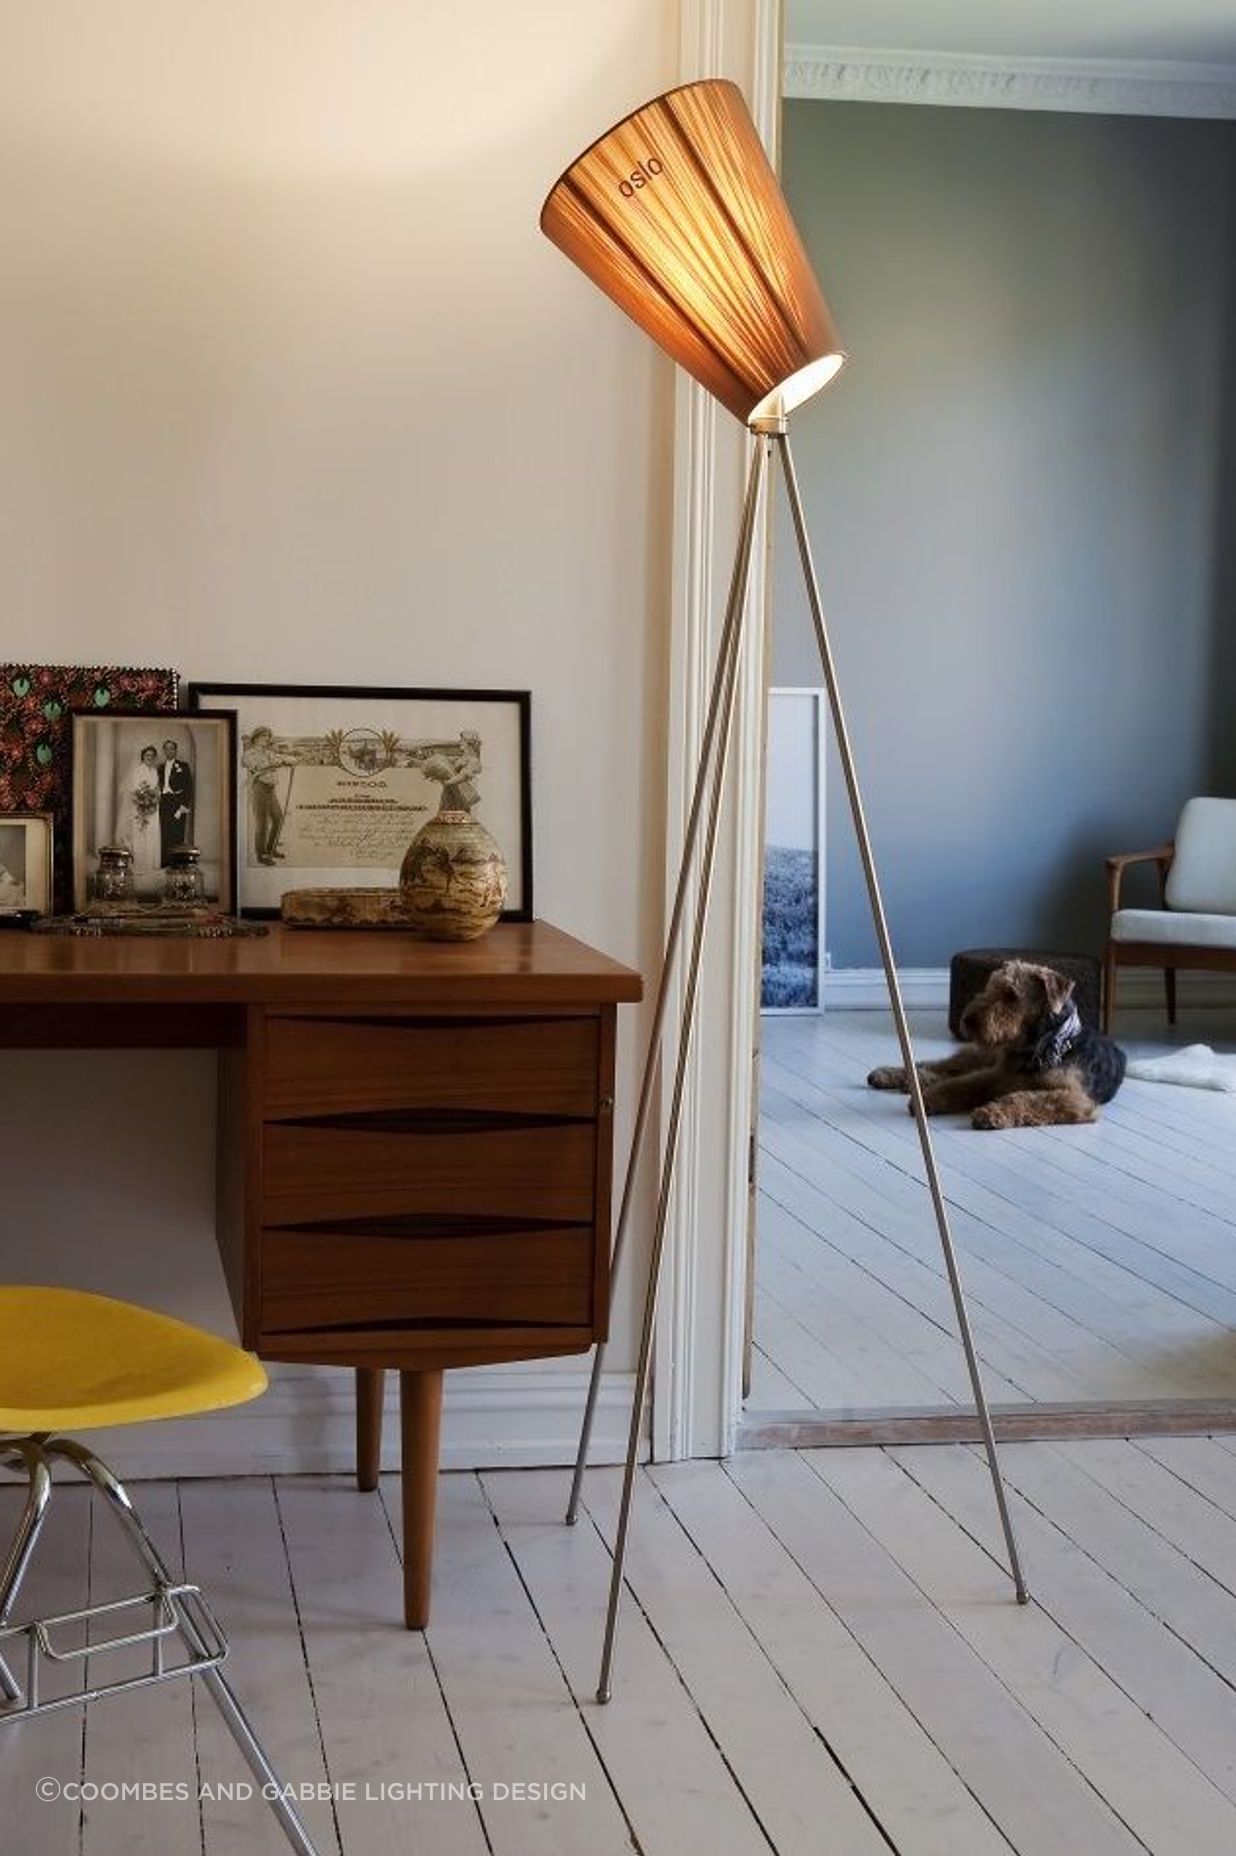 The Oslo Wood Floor Lamp seamlessly blends in with style